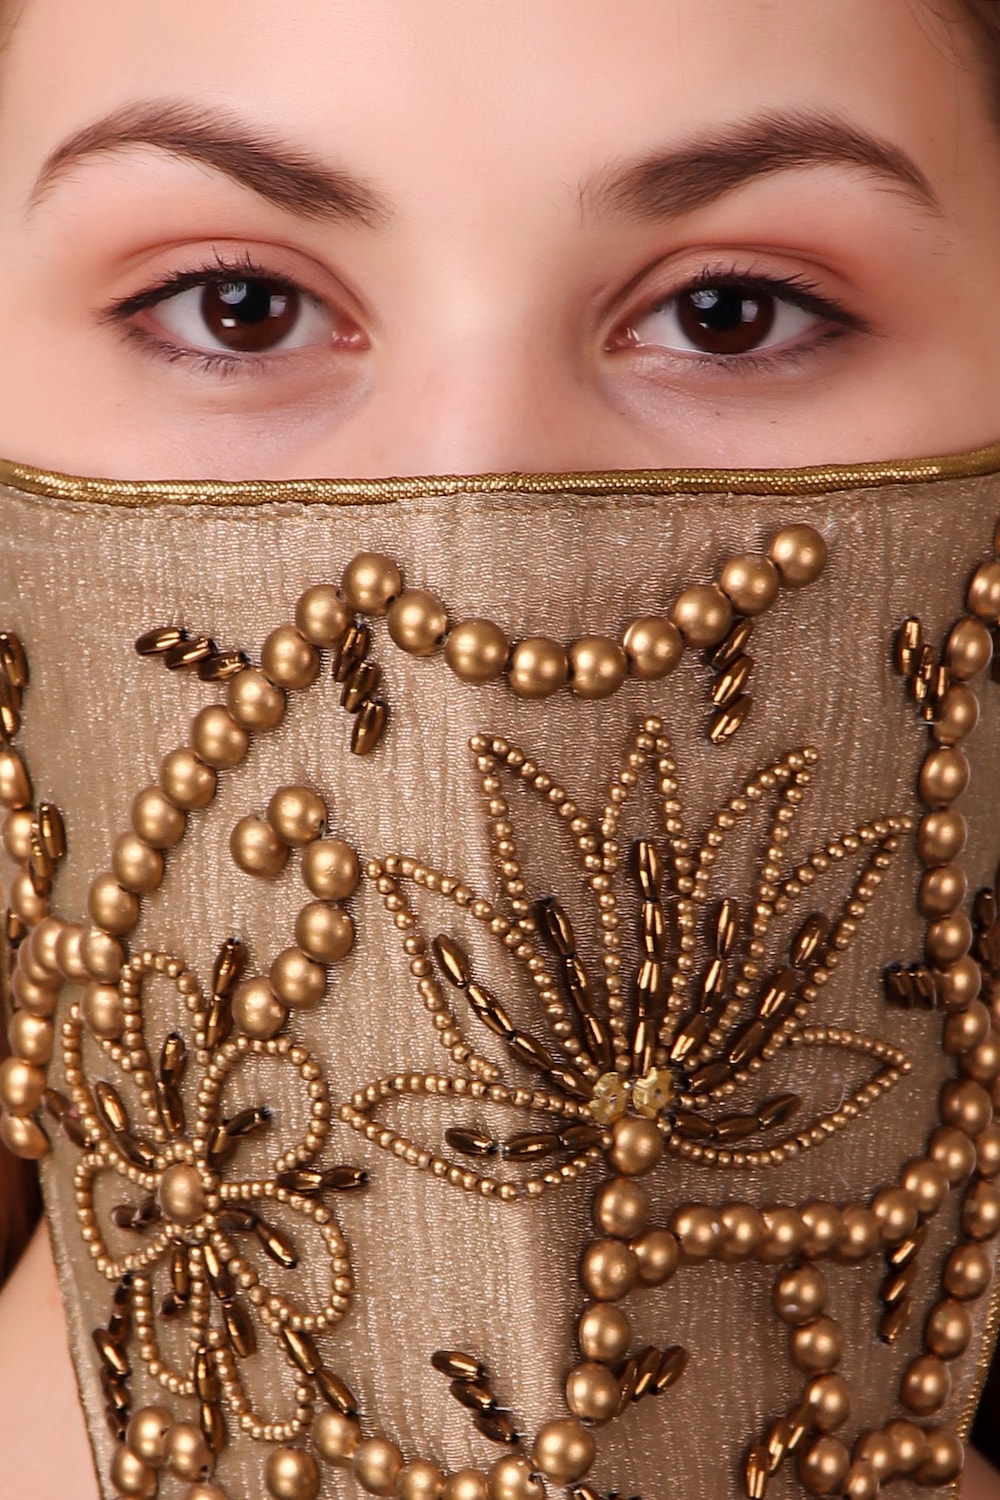 Hand Embroidered Silk Tissue Veil Style Face Mask